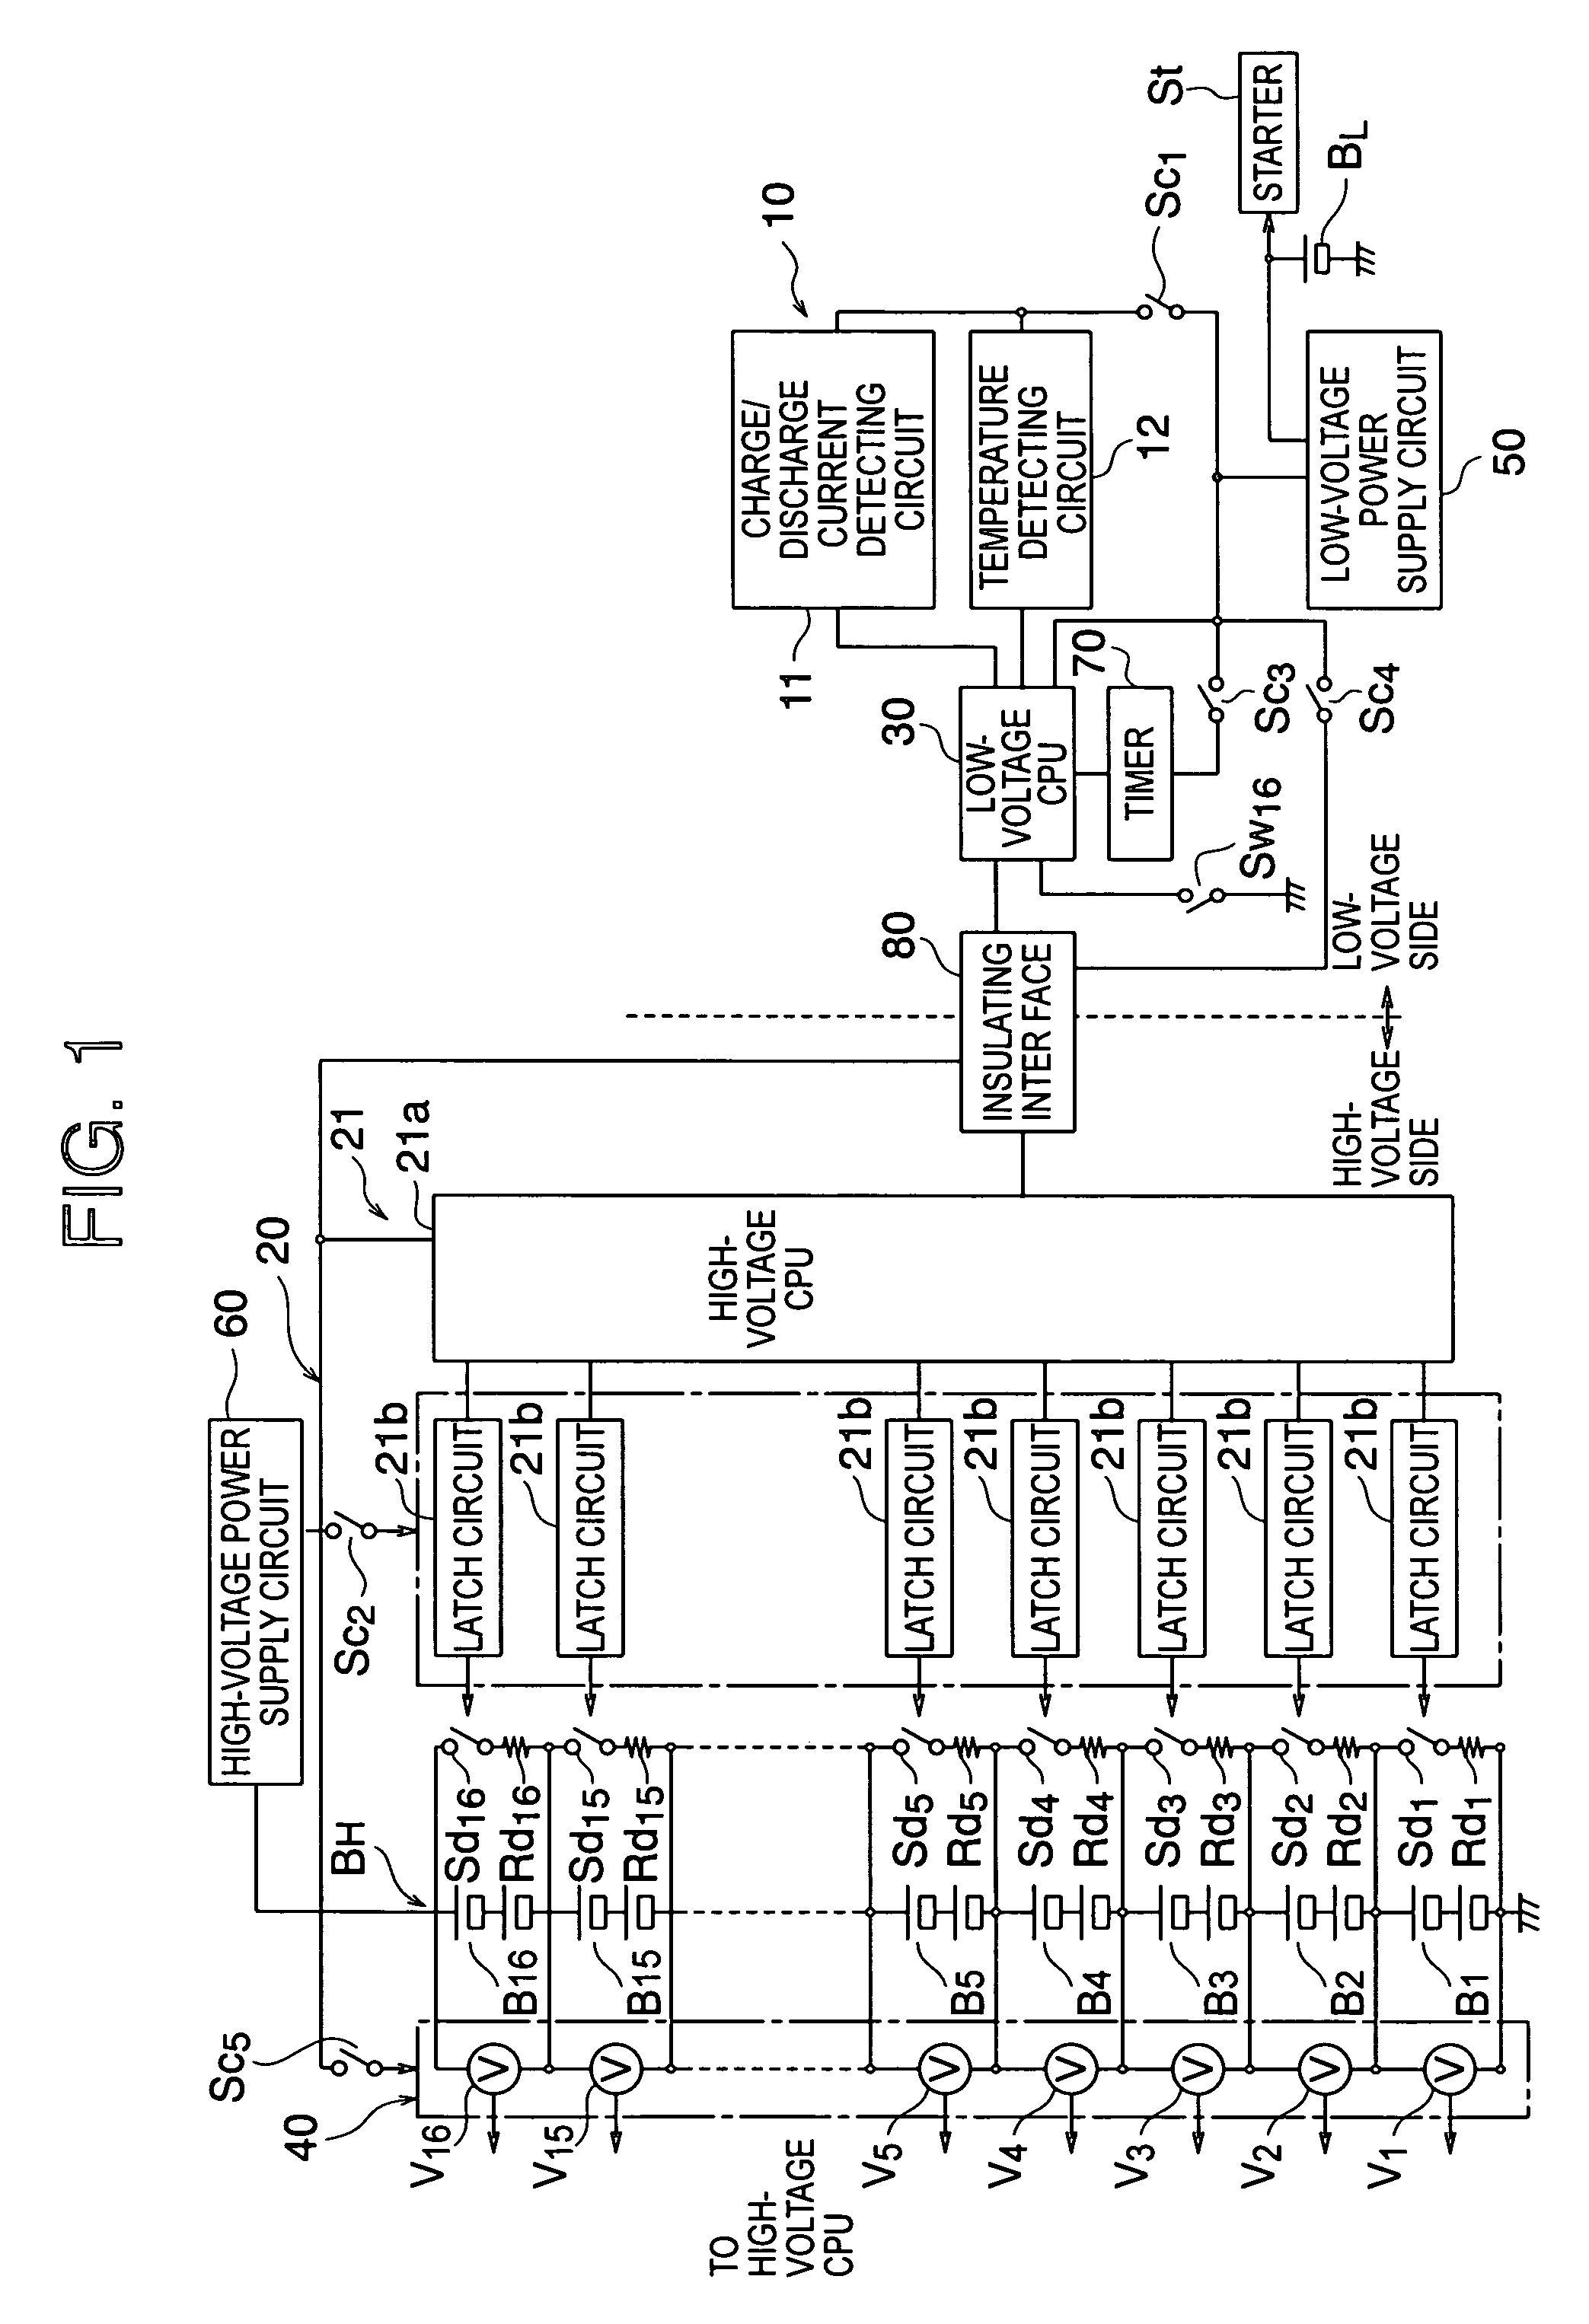 Battery control device for equalization of cell voltages